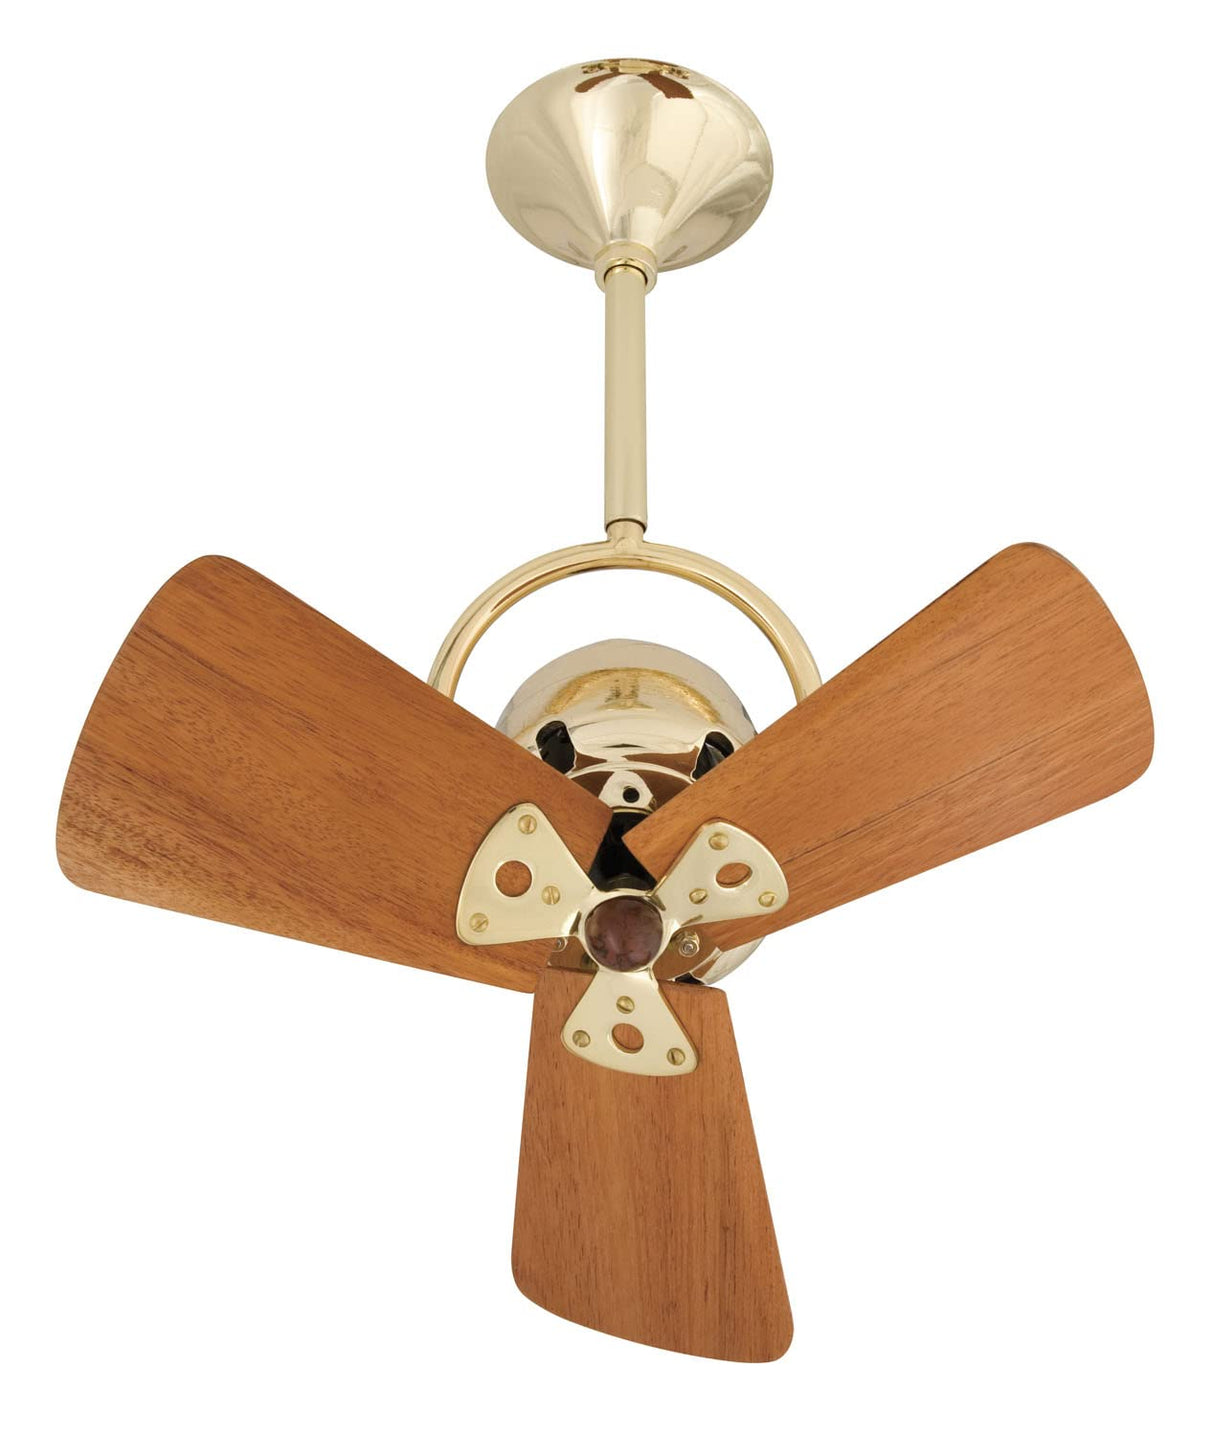 Matthews Fan BD-RED-WD Bianca Direcional ceiling fan in Rubi (Red) finish with solid sustainable mahogany wood blades.